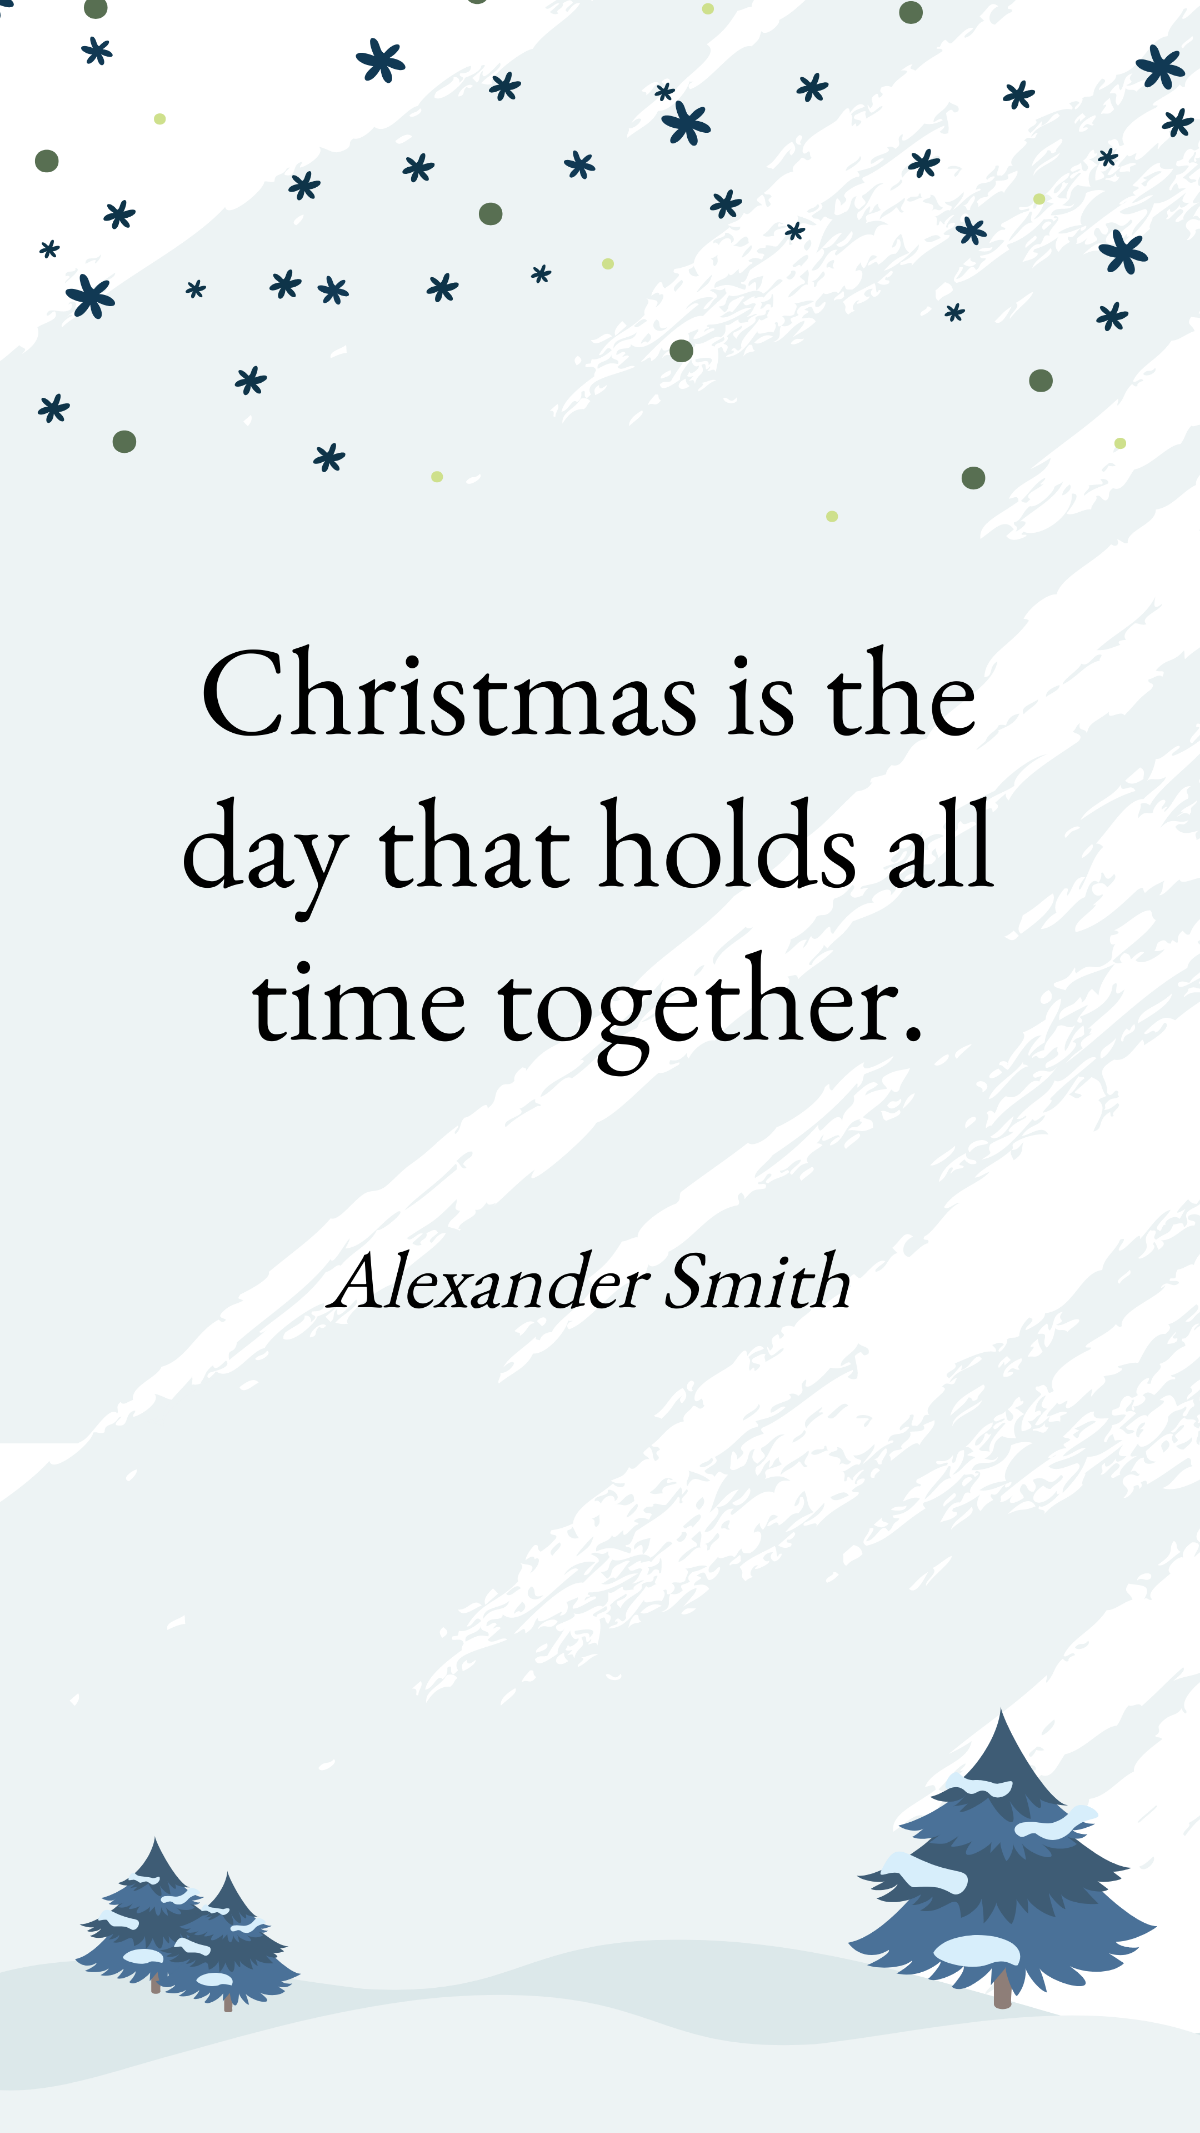 Alexander Smith - Christmas is the day that holds all time together. Template